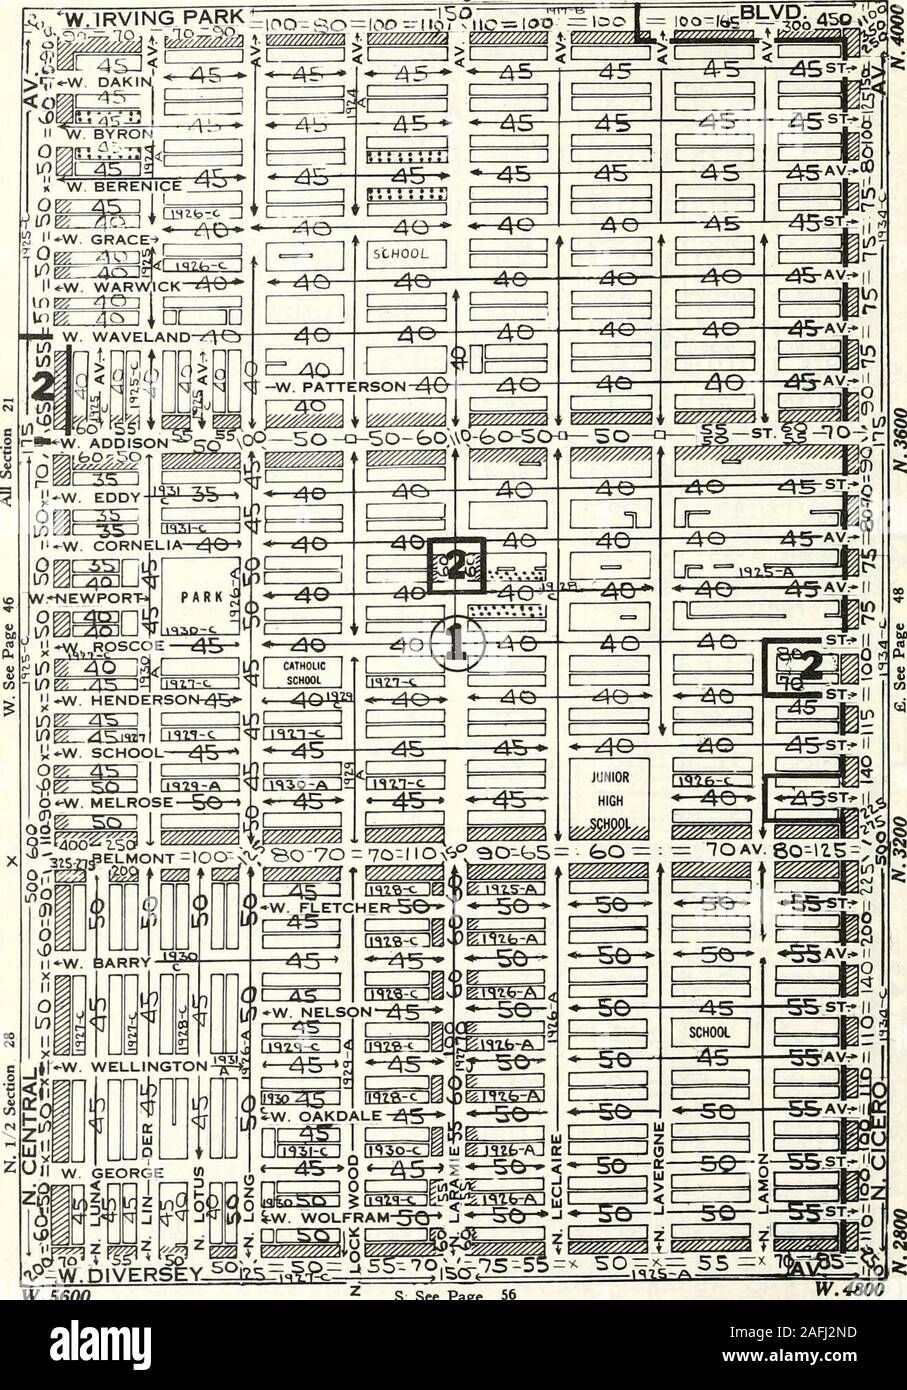 . Olcott's land values blue book of Chicago. &lt;l ^W. IRVING PARK wsA^ ir.vy;-rj &gt; i:t. : -WMDAKIN 50- ^.6400 KWi Sec £0 Class 3-£-15-Ainer Swl Sec iO Class S-4-15-Vac lots-Ar.er Trw| Sec 29 Class 4-15-Vac Lo-ts-Air.er S. See Page 55 W.S600 NEi Sec 20 Class 2-4-15-10-Amer SEi Sec 20 Class 3-4-15-l£-Vac Lots-Amer HEJ Sec 29 Class 4-lC-le-ie-Vac Lots-Amer 47 OLCOTTS LAND VALUES & ZONING 1936T, 40 N.—R. 13 E. N. See Page 38 V^^jgj ^. eJS^^/j r Y^TTTTF^^m. J- ^^. HWi Seo 21 Class 3-4-15-AmerSWl Seo 21 Class 3-4-15-18-AmerBwl Sea 28 Class 4-15-18-Amer S: See Page v/.4mo NEi Seo 21 Class 3-4-14- Stock Photo